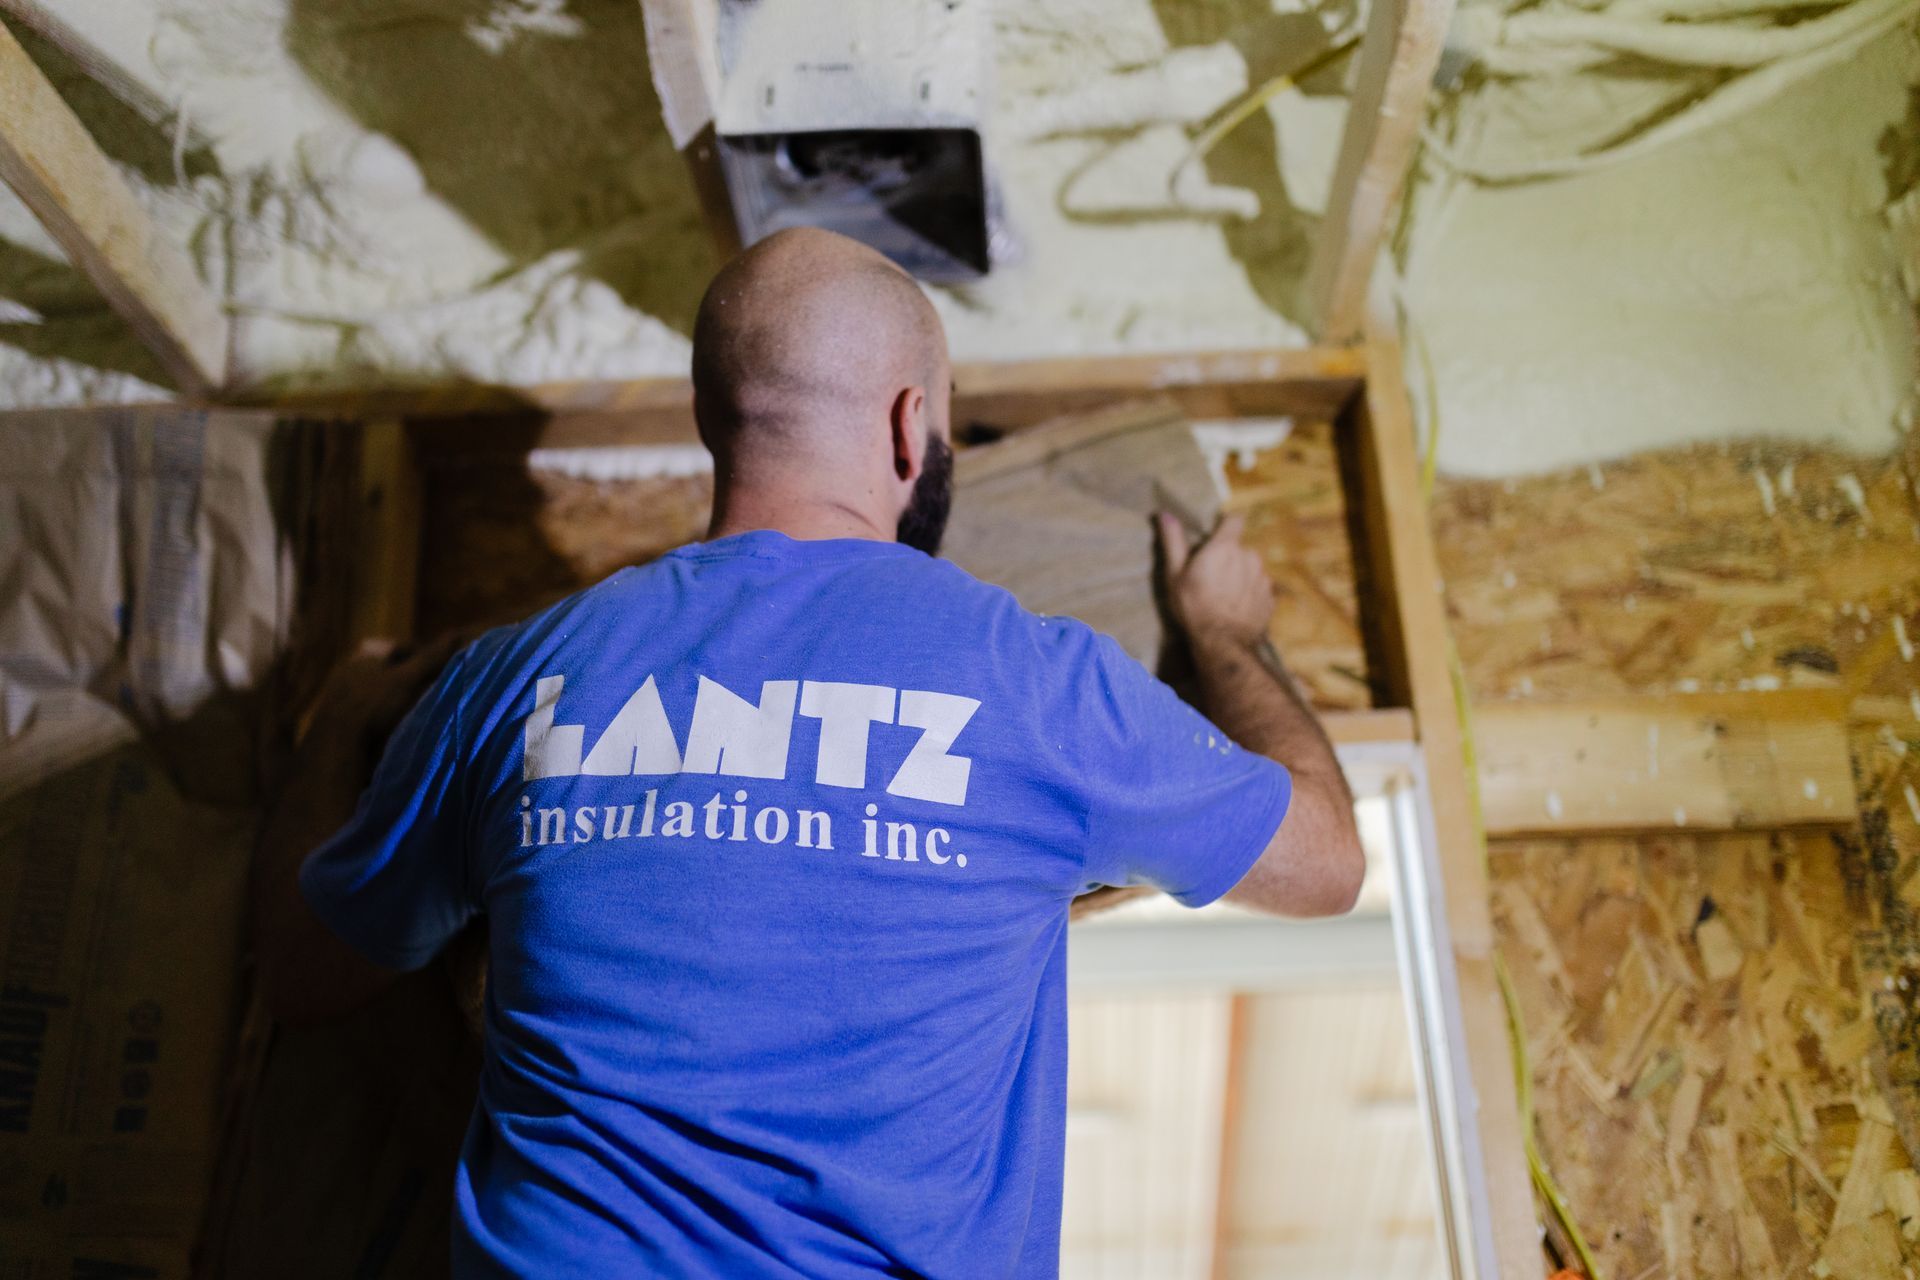 a man in a blue shirt is working in an attic .